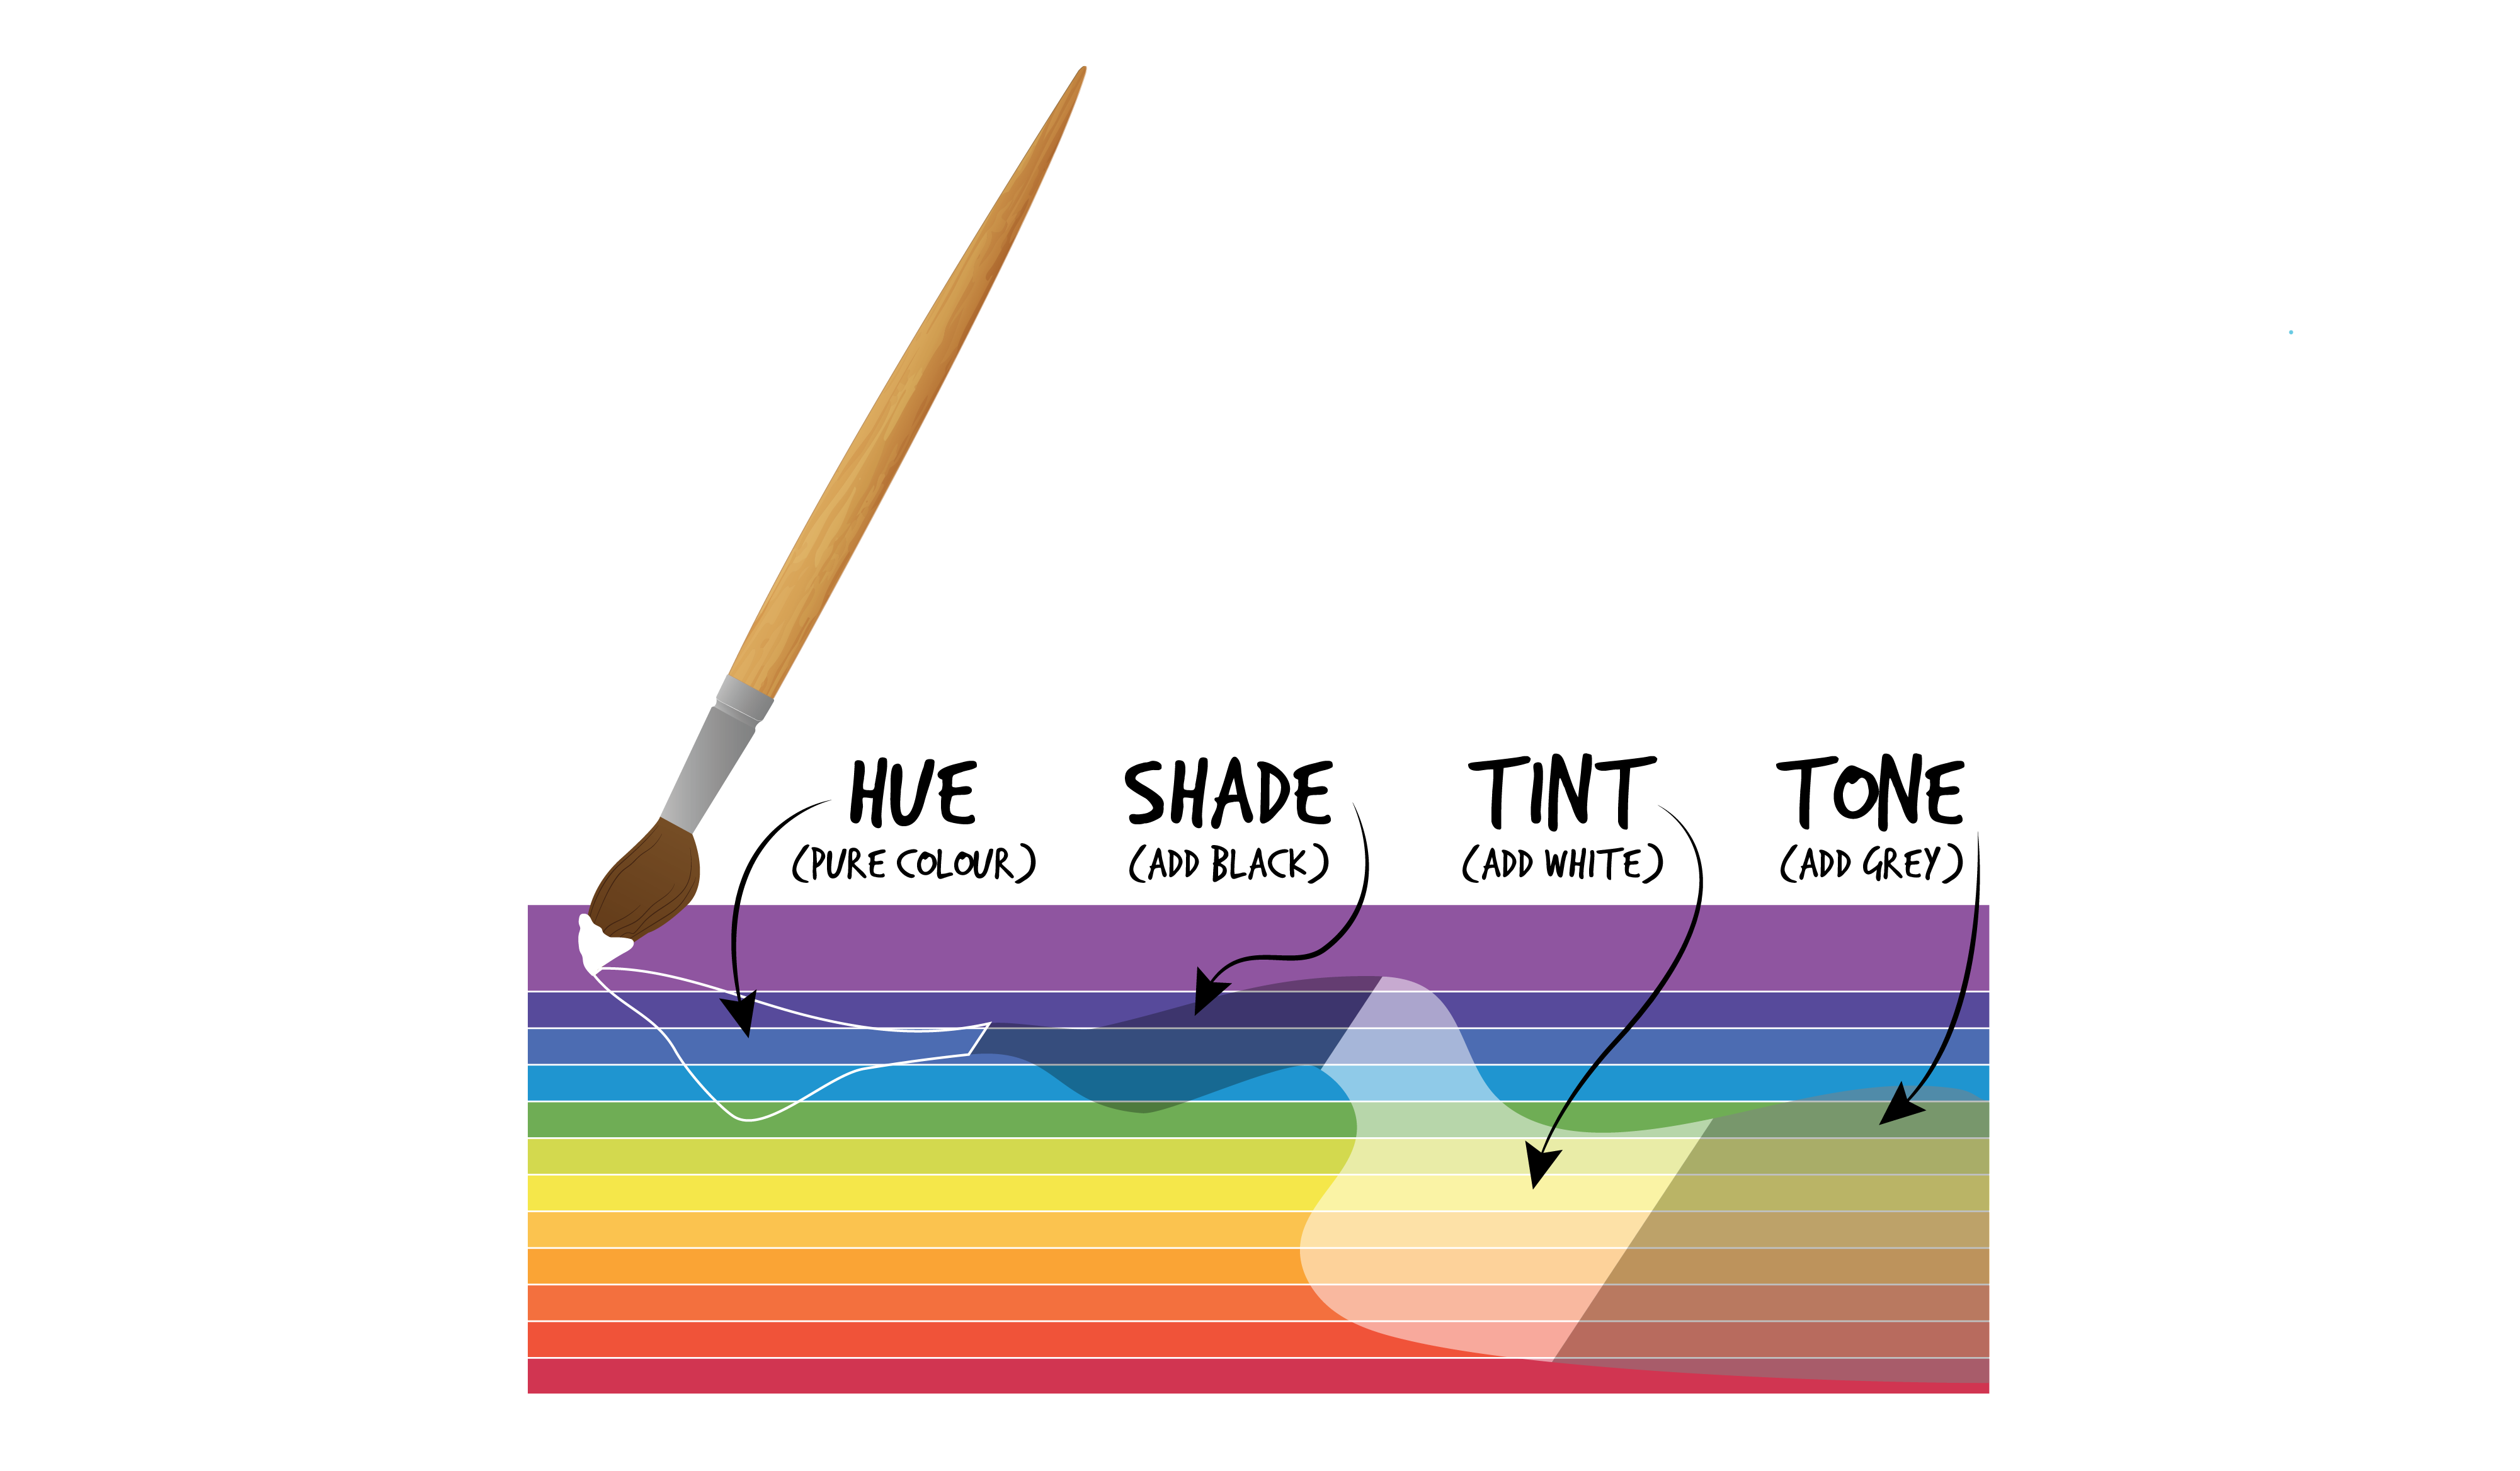 Rectangle with 12 strips of colours ranging from purple to blue to green to yellow to orange to red. A brown paint brush with a white tip is at the top left corner. There are 4 sections being shown: (from left-right) hue which is the area with pure colours, shade which is a small area where black has been added to the pure colours, tint which is a slightly larger area where white has been added tot he pure colours, and tone where grey has been added to the pure colours.